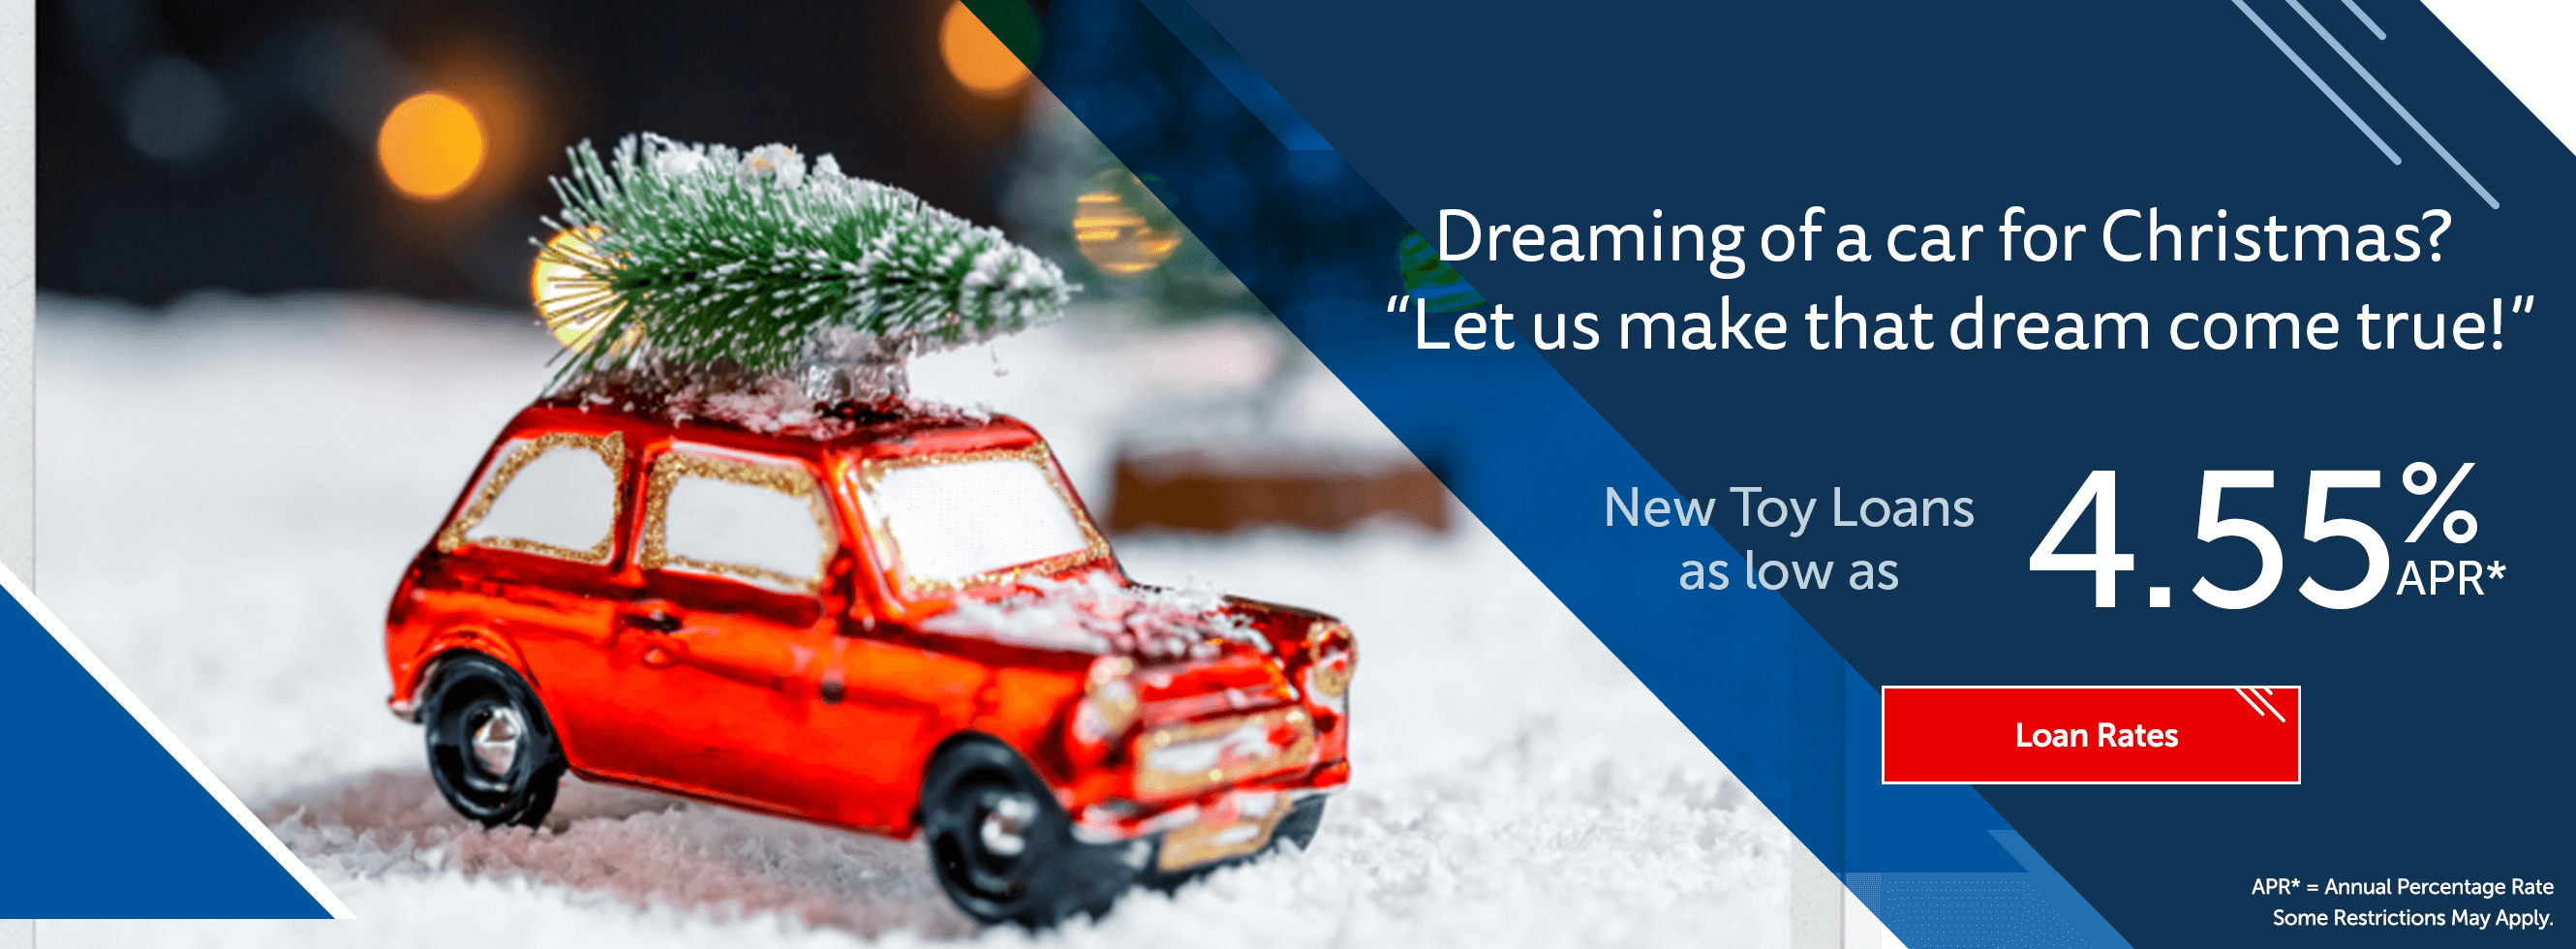 Dreaming of a car for Christmas? Let us make that dream come true!